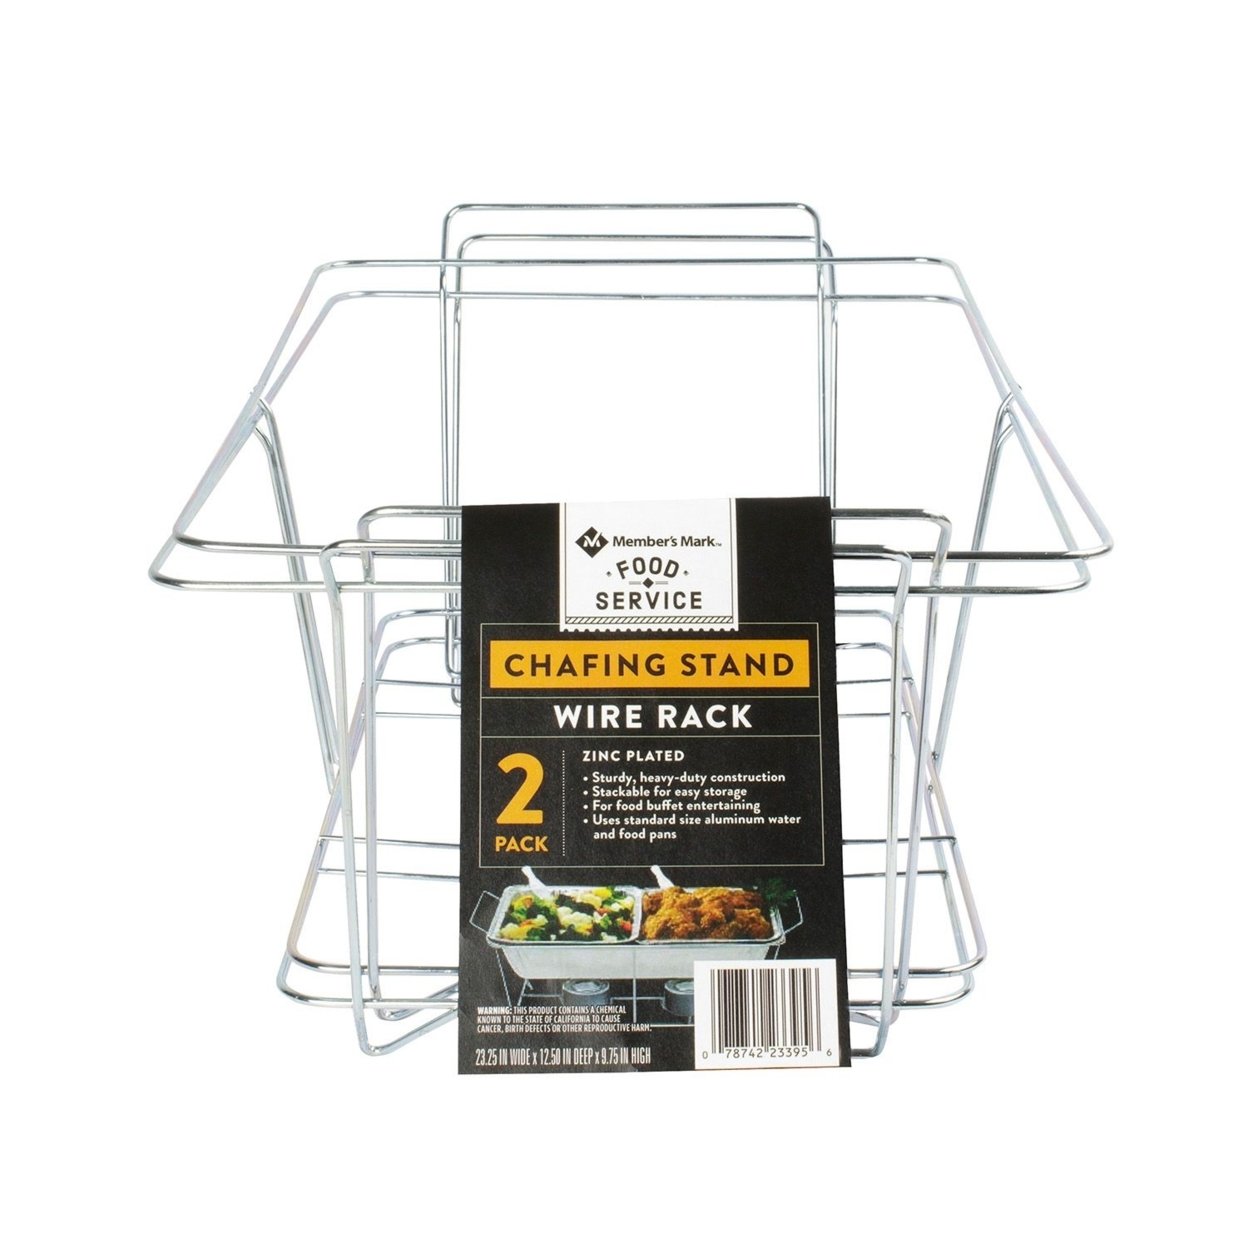 Member's Mark Chafing Dish Wire Rack (2 Pack)